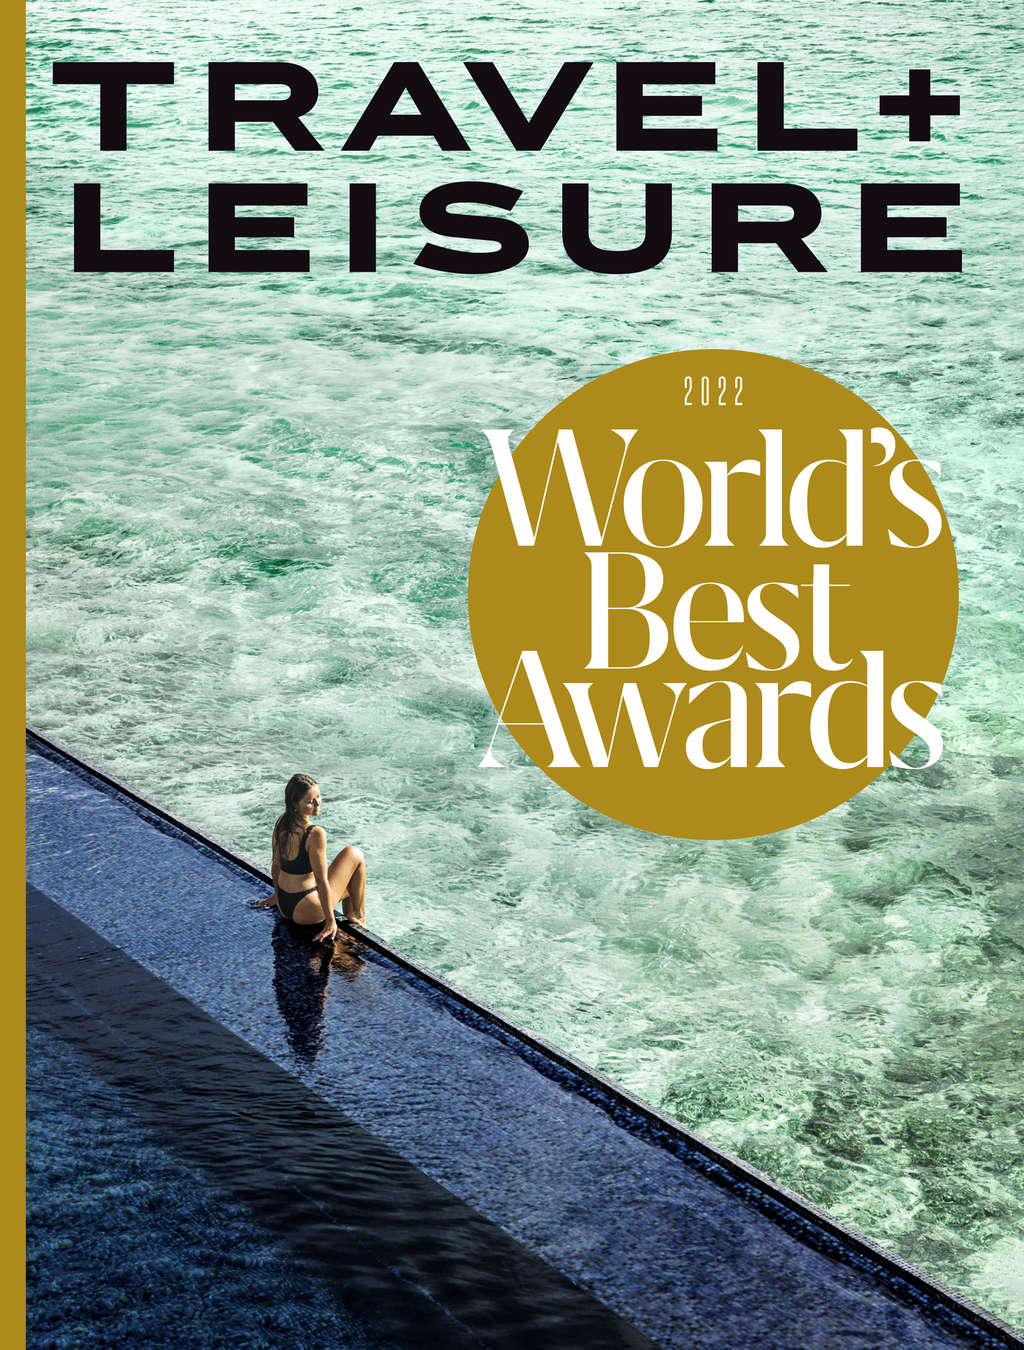 travel and leisure world's best awards 2022